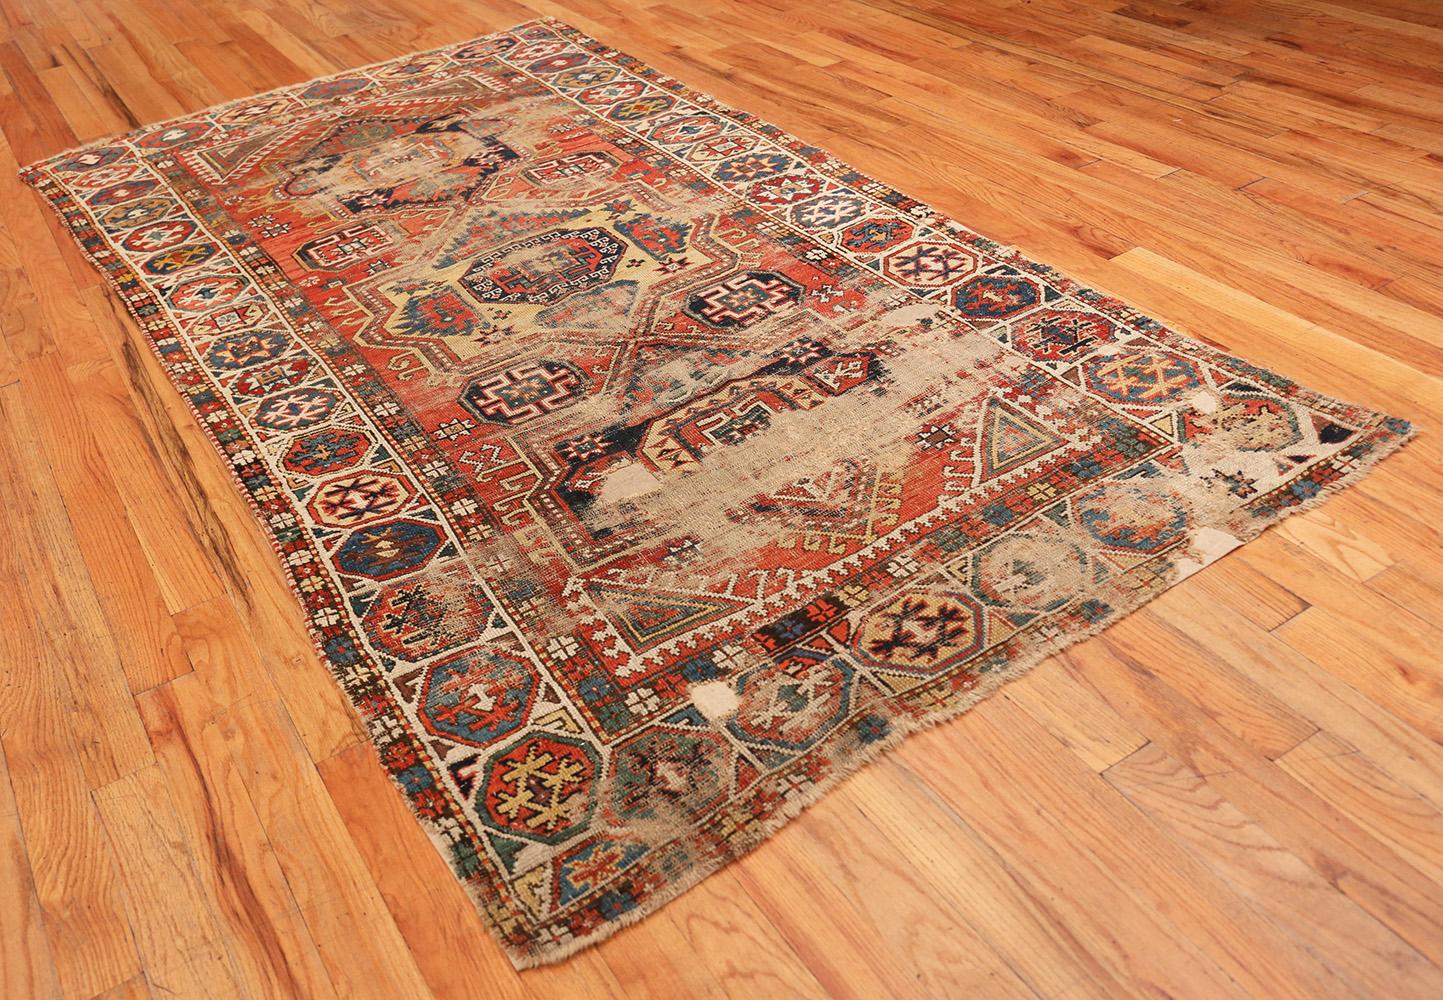 Late 19th Century Antique Shabby Chic Caucasian Kazak Rug. Size: 4 ft 10 in x 9 ft 6 in